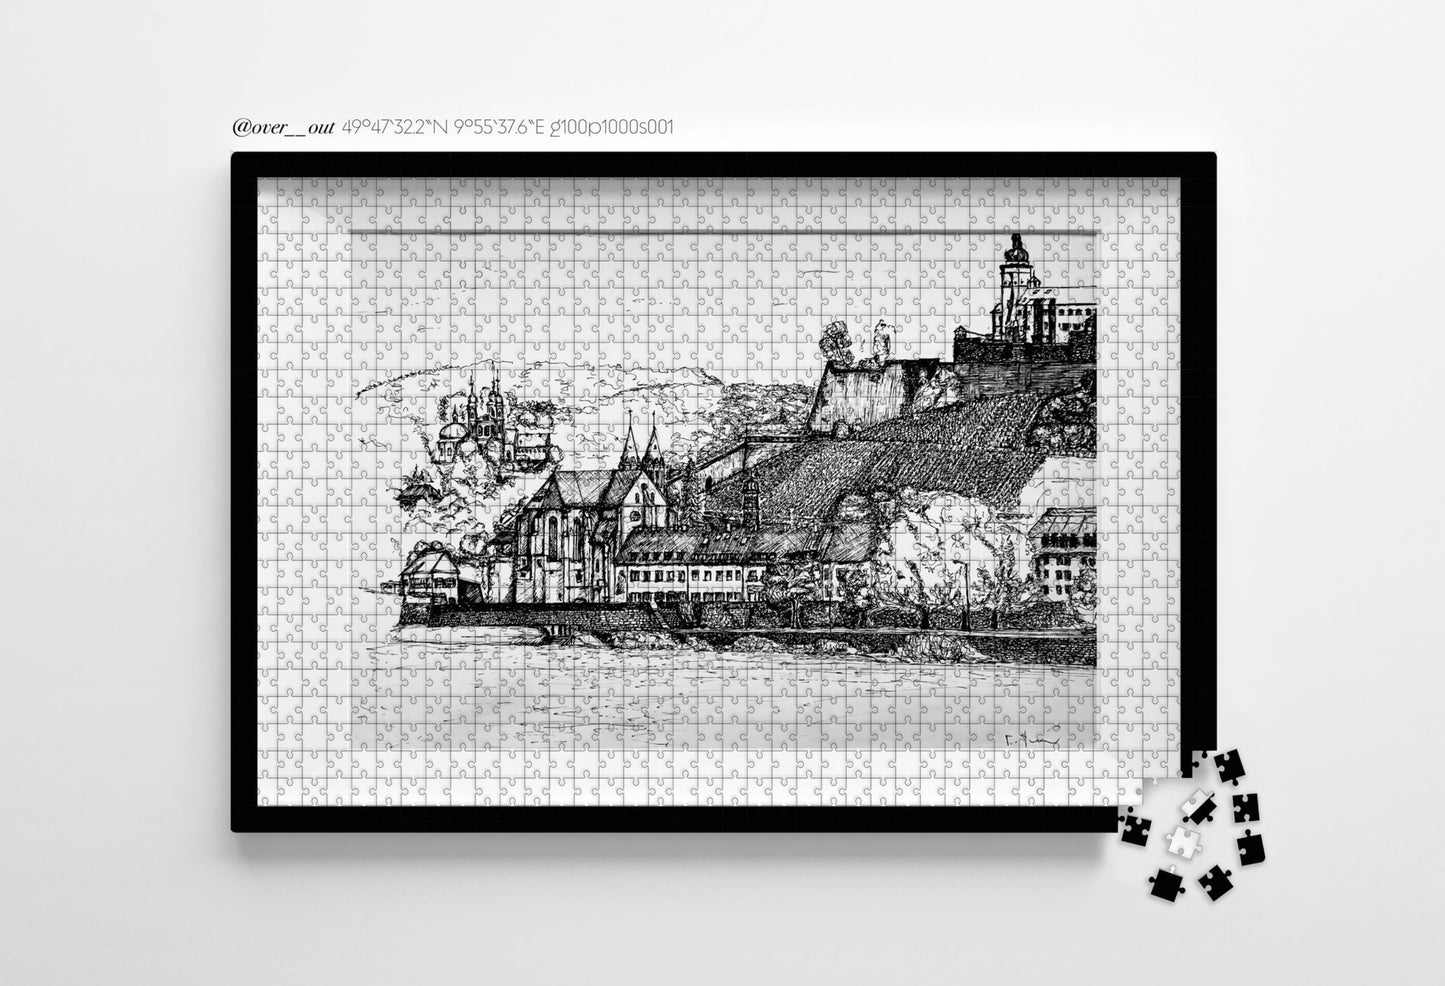 Limited edition Puzzle Würzburg 49°47'32.2"N 9°55*37.6"E